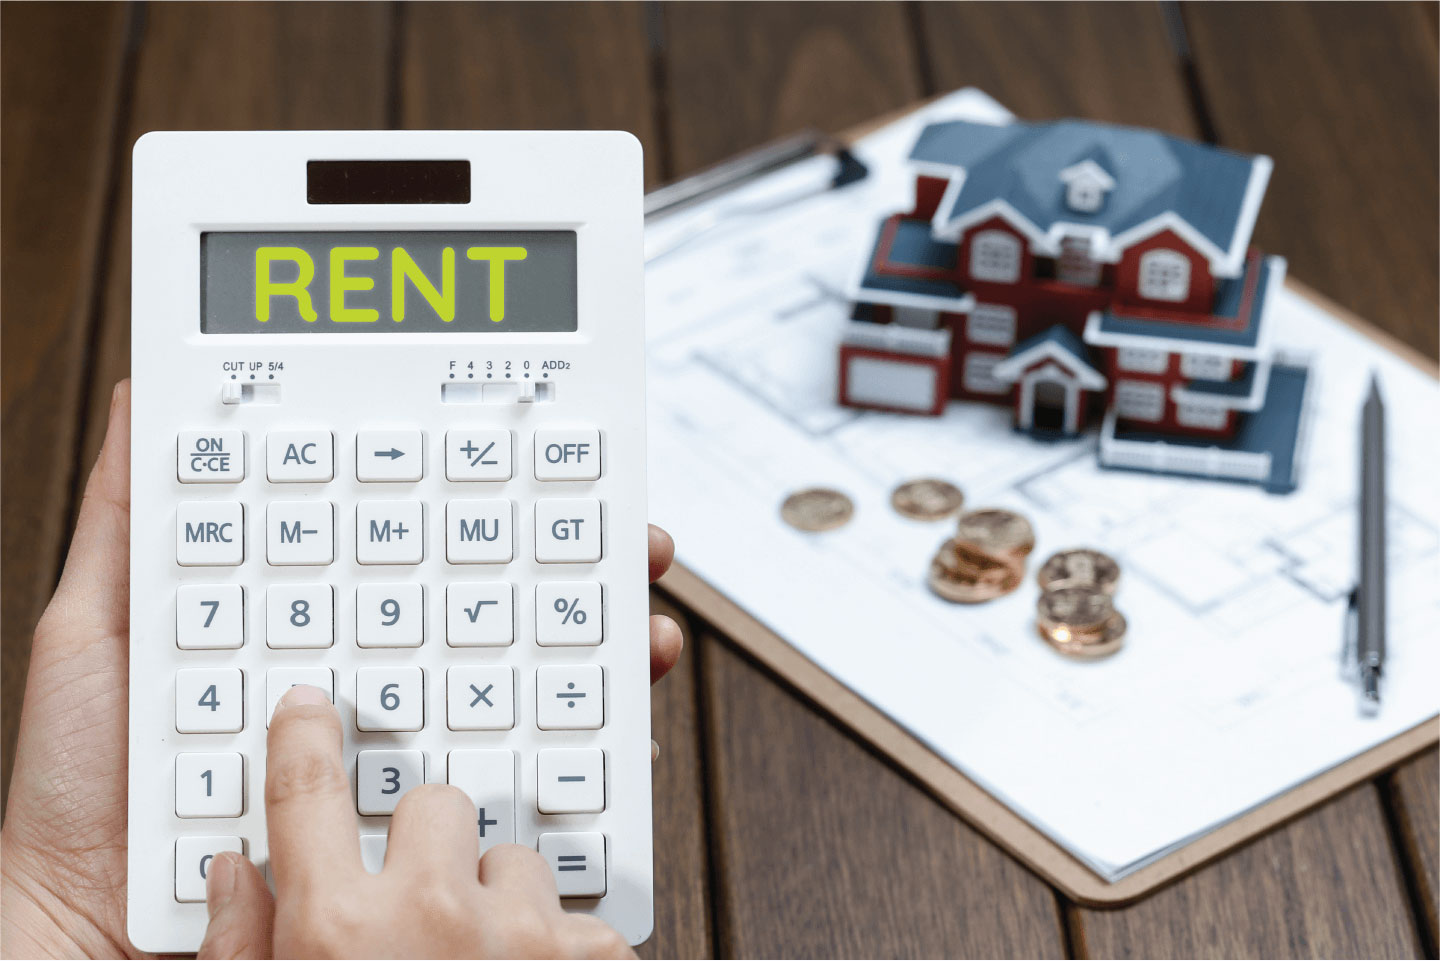 Monthly Rent Calculator: How To Calculate Monthly Rent